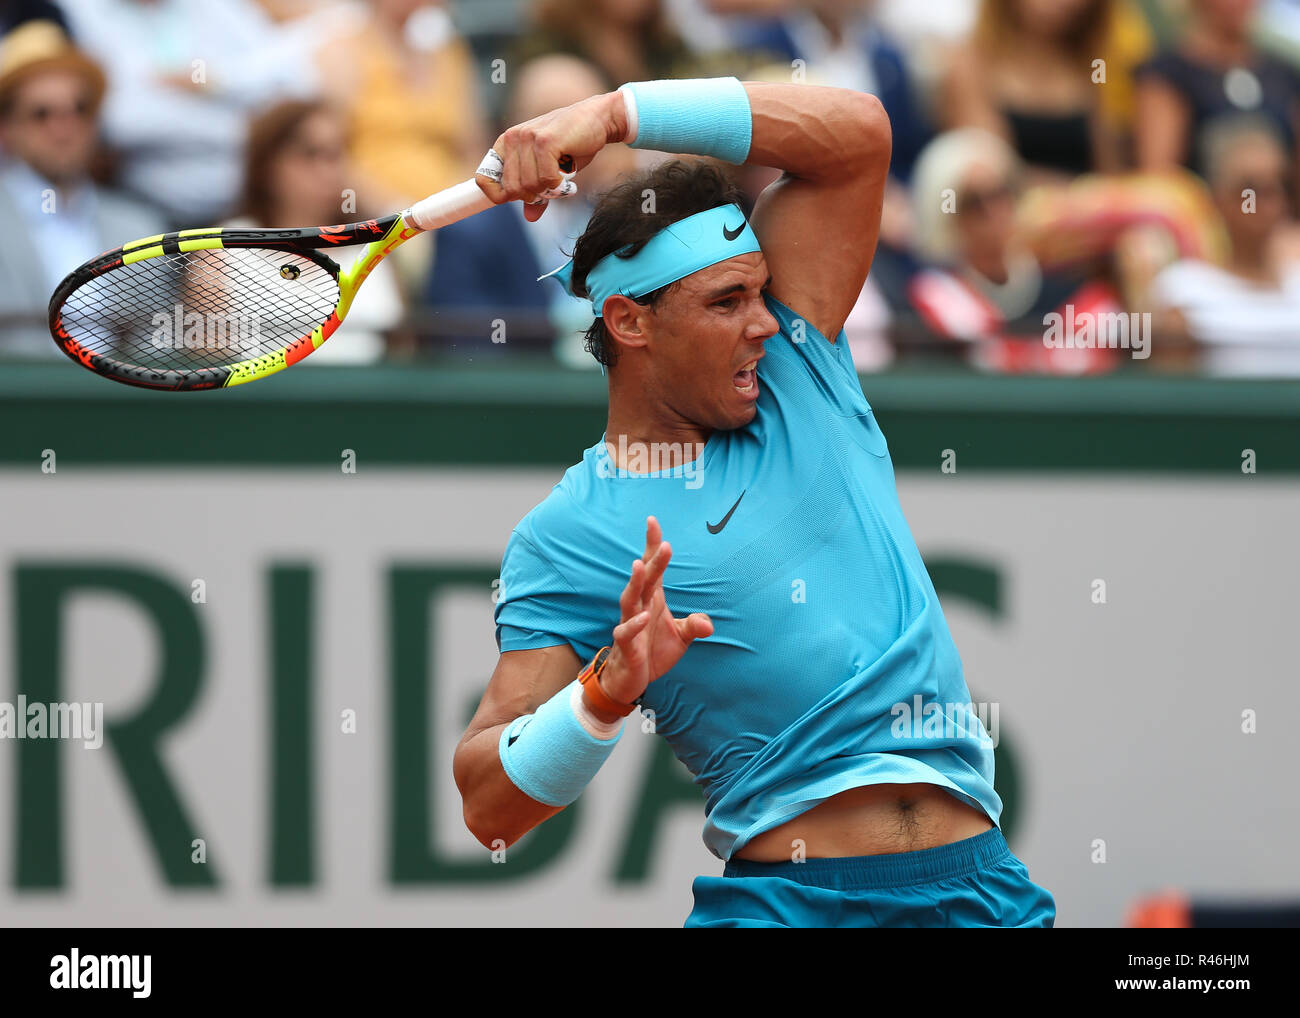 Spanish  tennis player Rafael Nadal  playing forehand shot at the French Open 2018, Paris, France Stock Photo